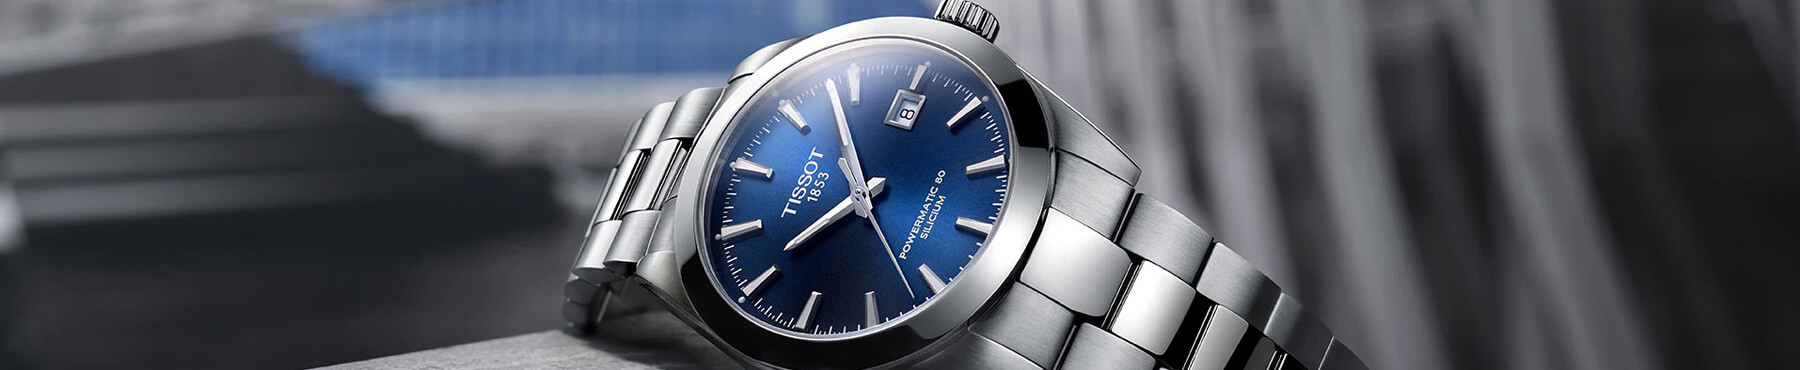 Tissot T-Classic Luxury Automatic Watches